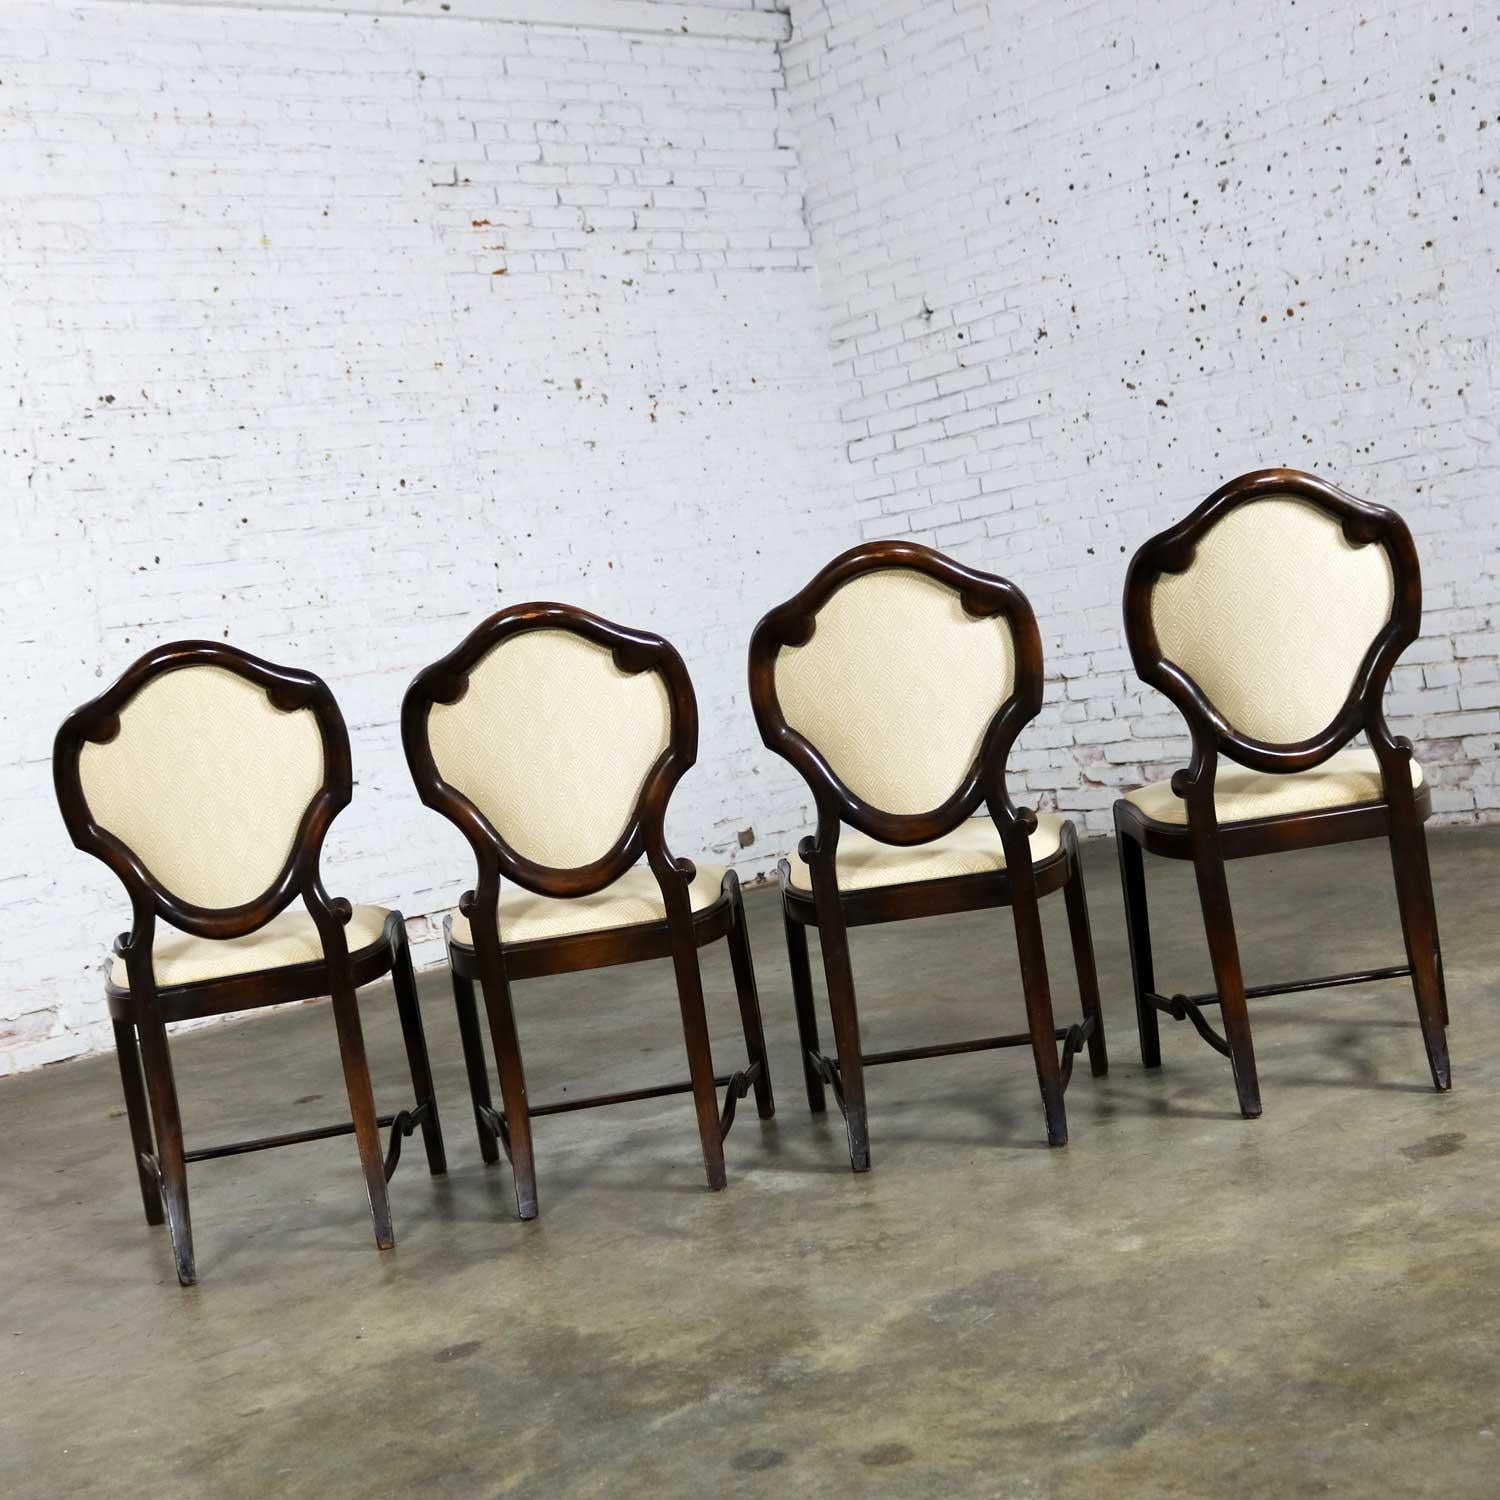 20th Century Antique Art Nouveau or Art Deco Shield Back Dining Chairs Set of Four For Sale